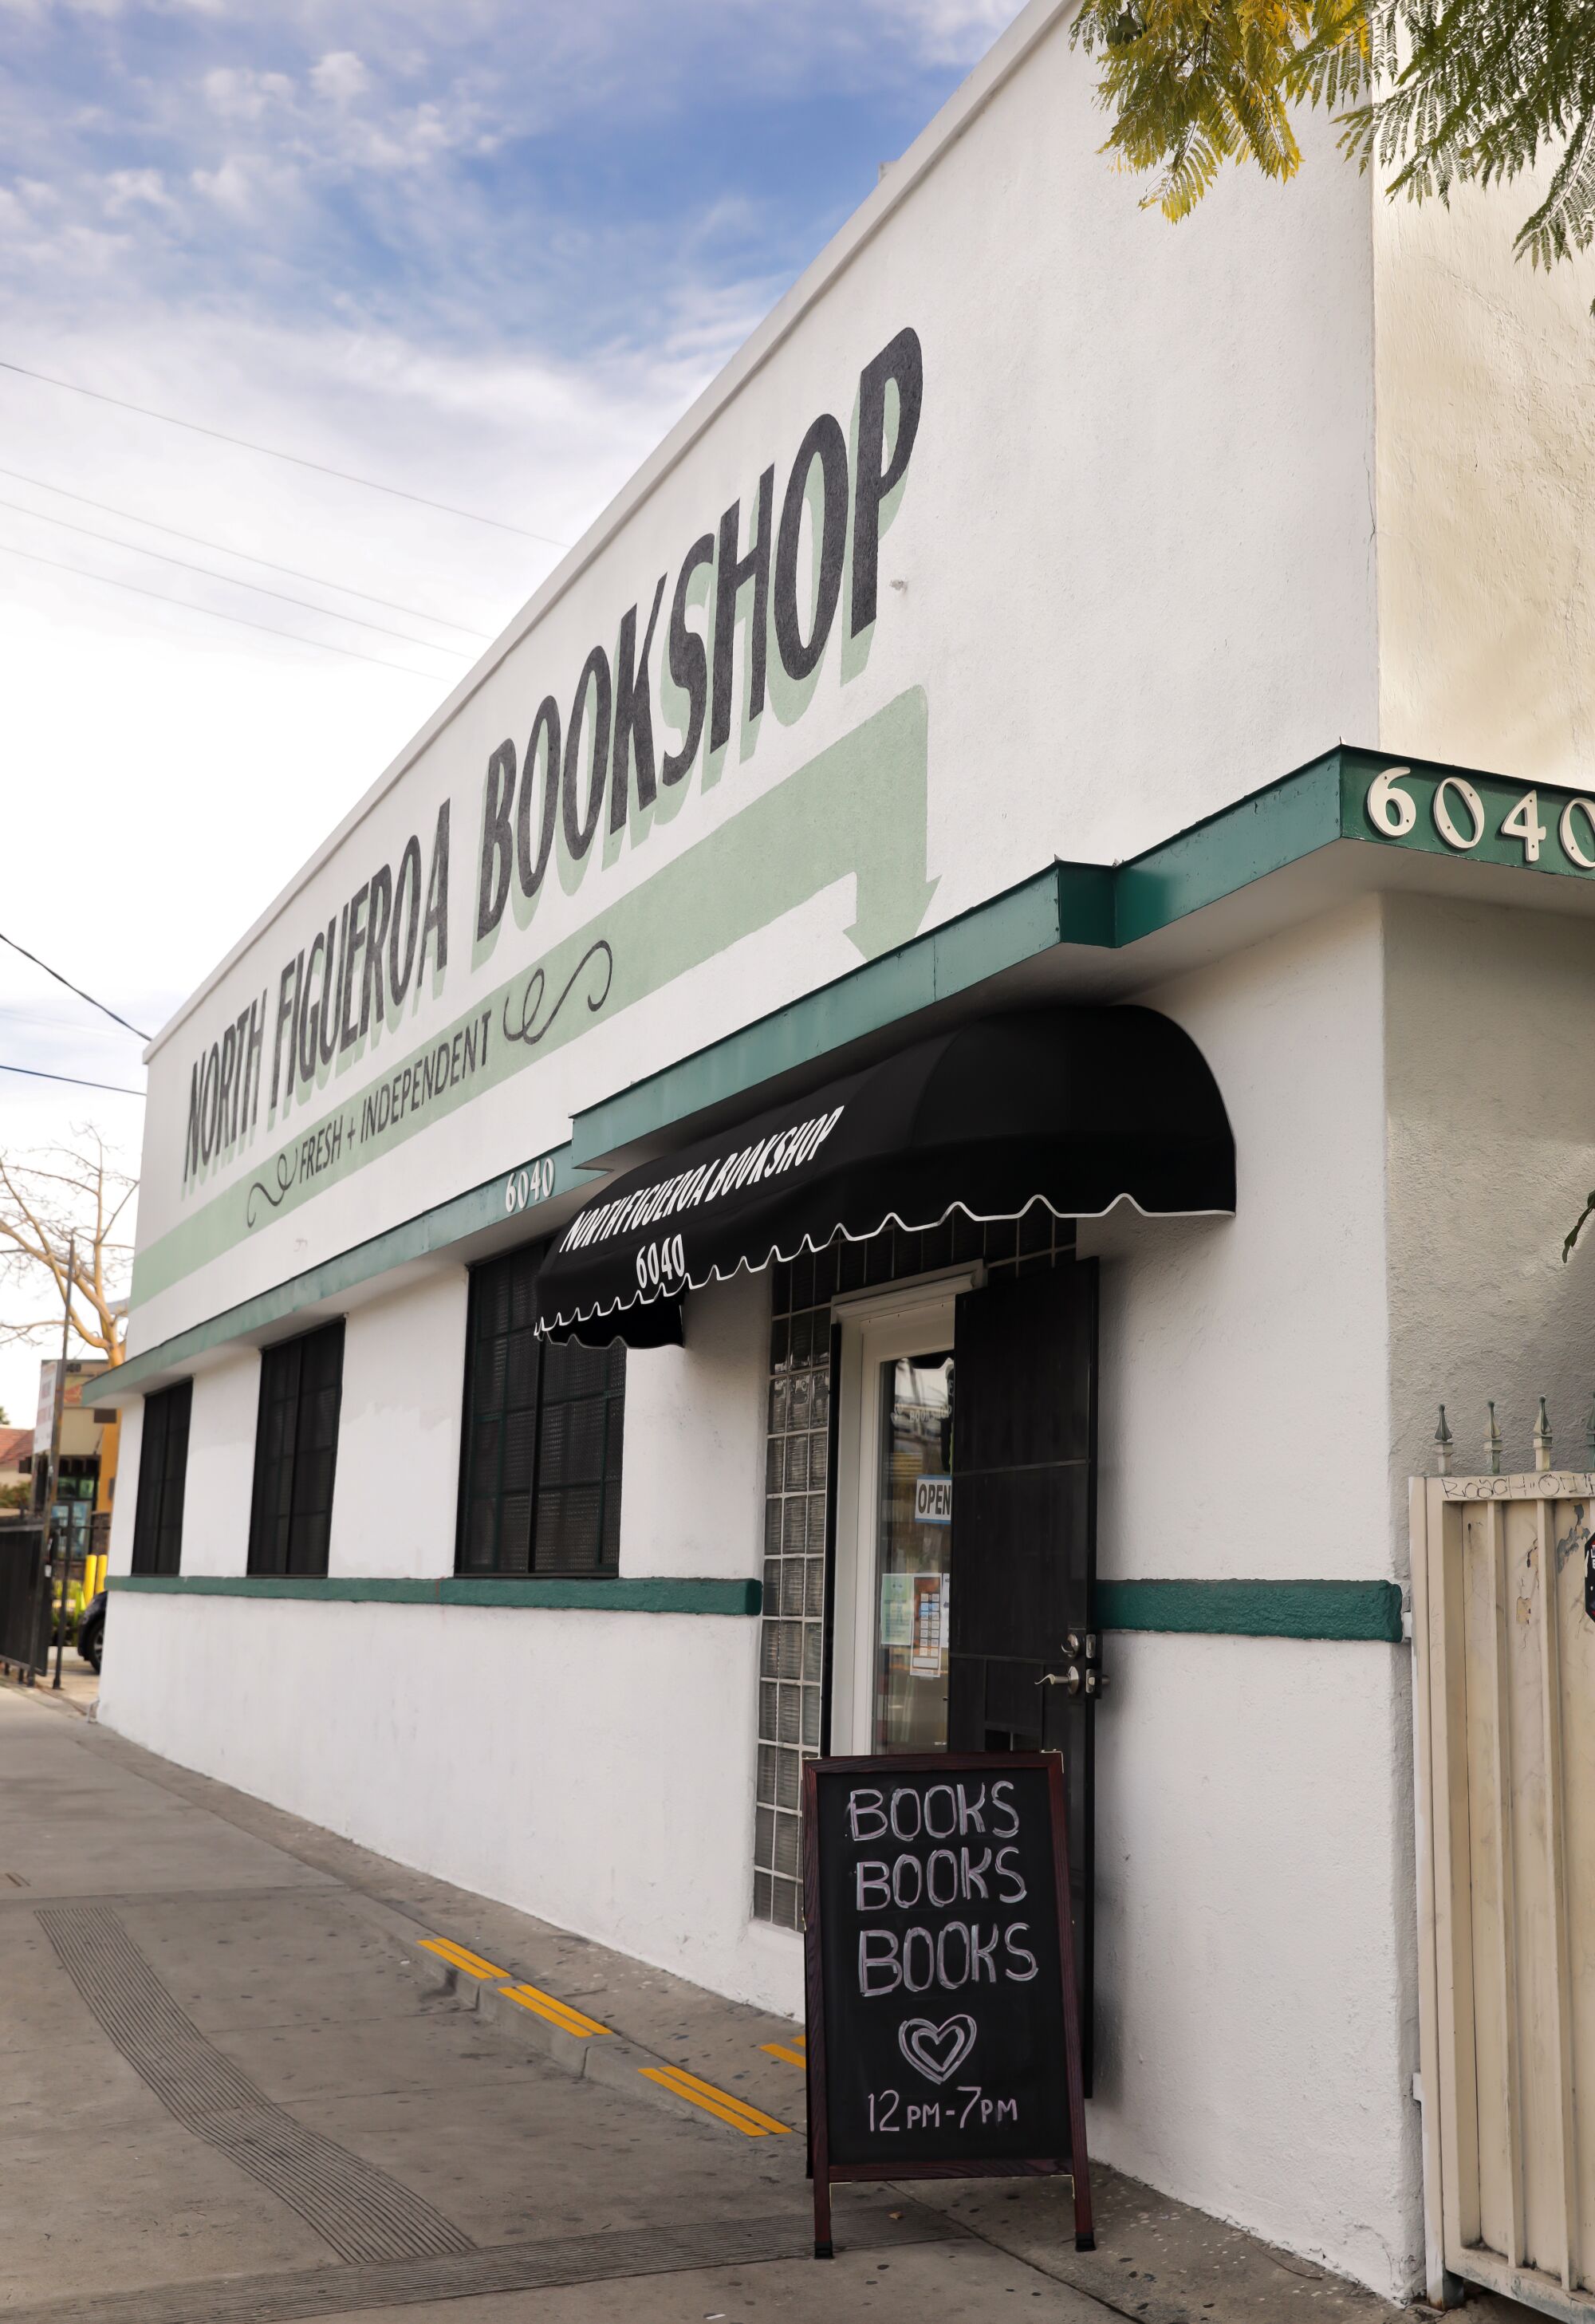 North Figueroa Bookshop unifies a hipster aesthetic with a bookish vibe.